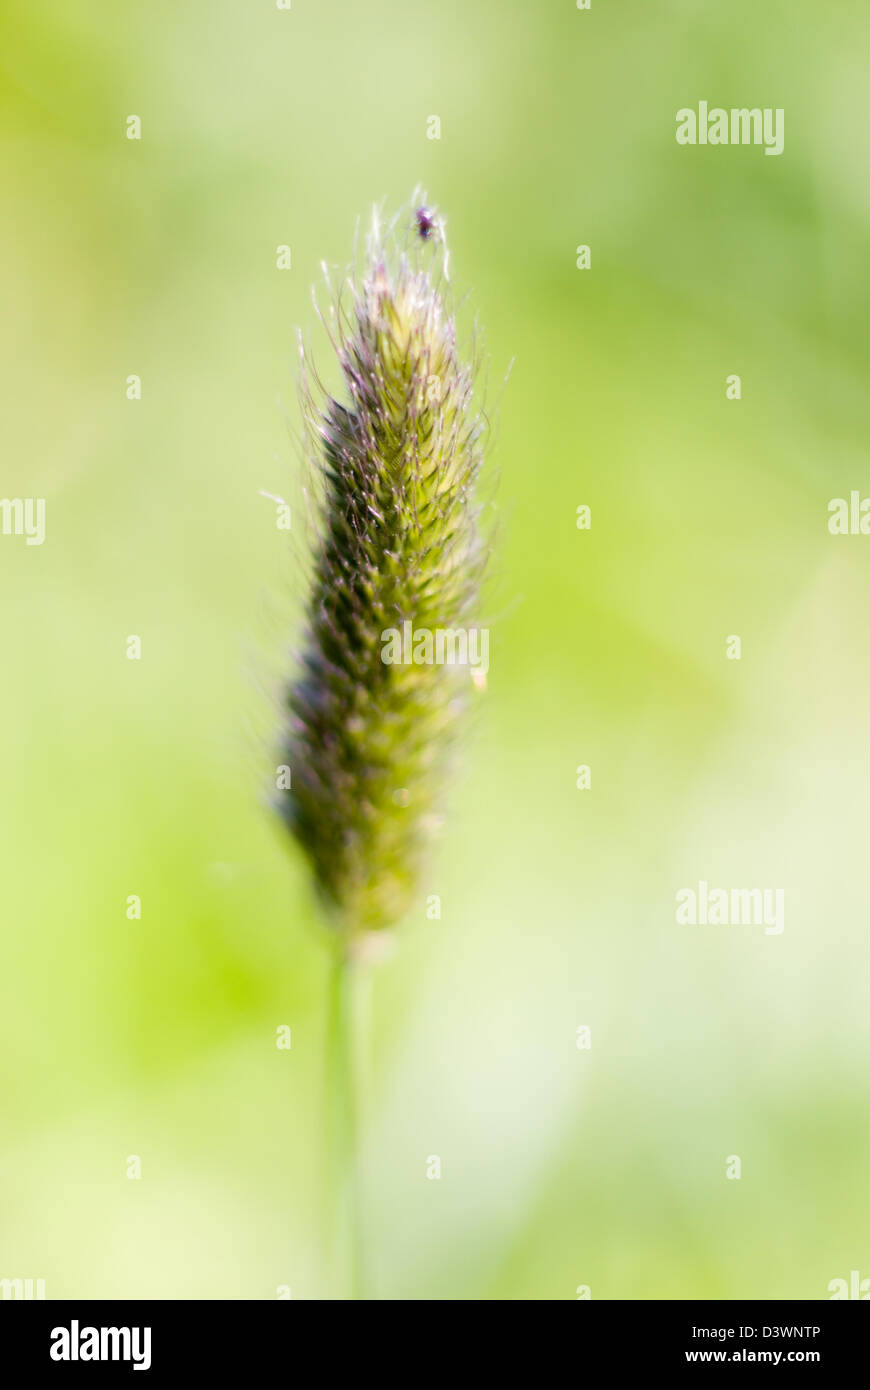 Timothy .Shallow depth-of-field Stock Photo